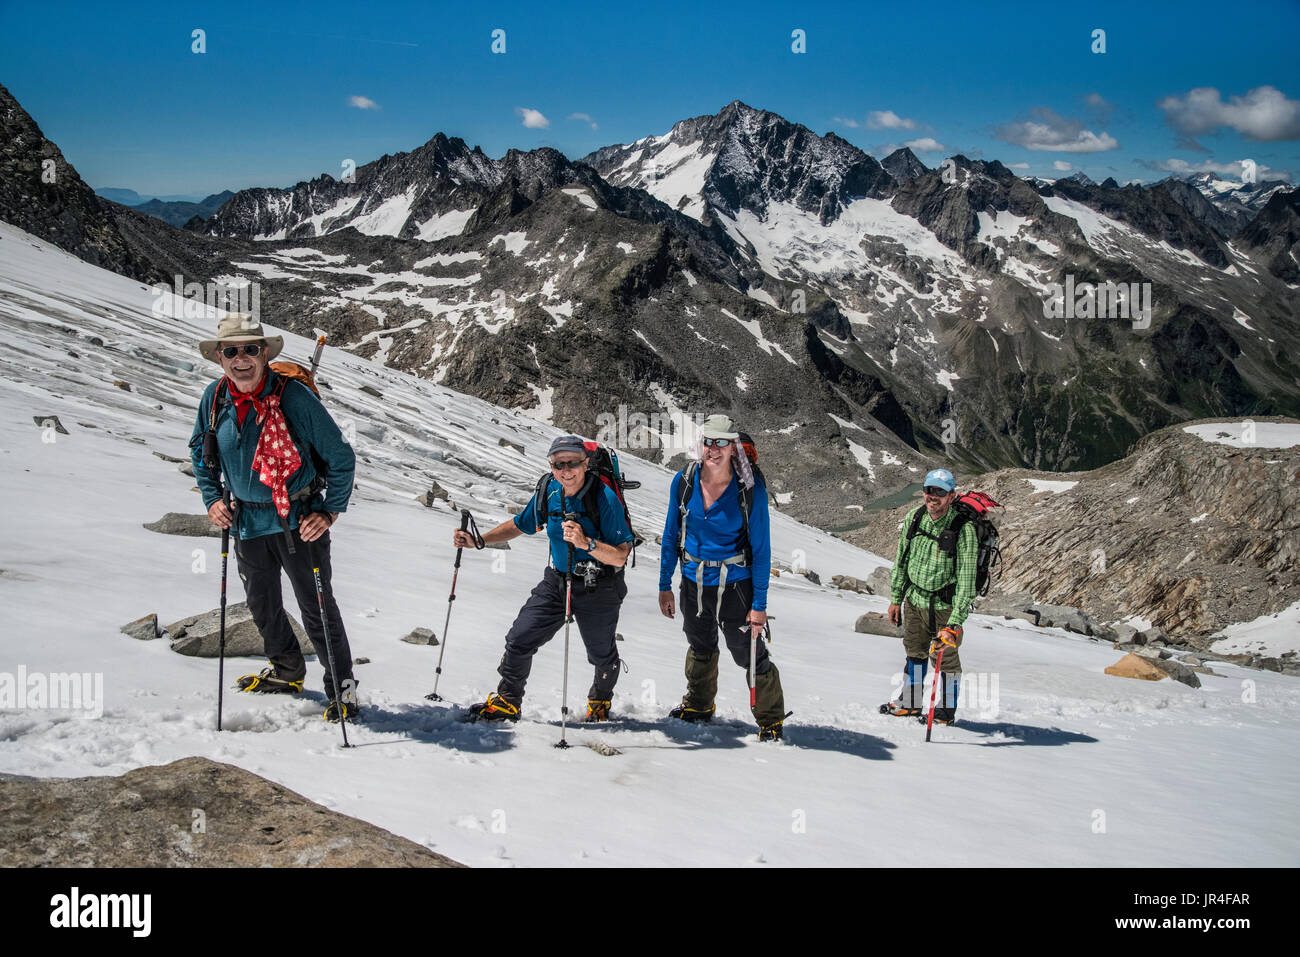 Trekking in the Zillertal seen here with mountaineers on ice remnants of the Stillupp Kees glacier Stock Photo